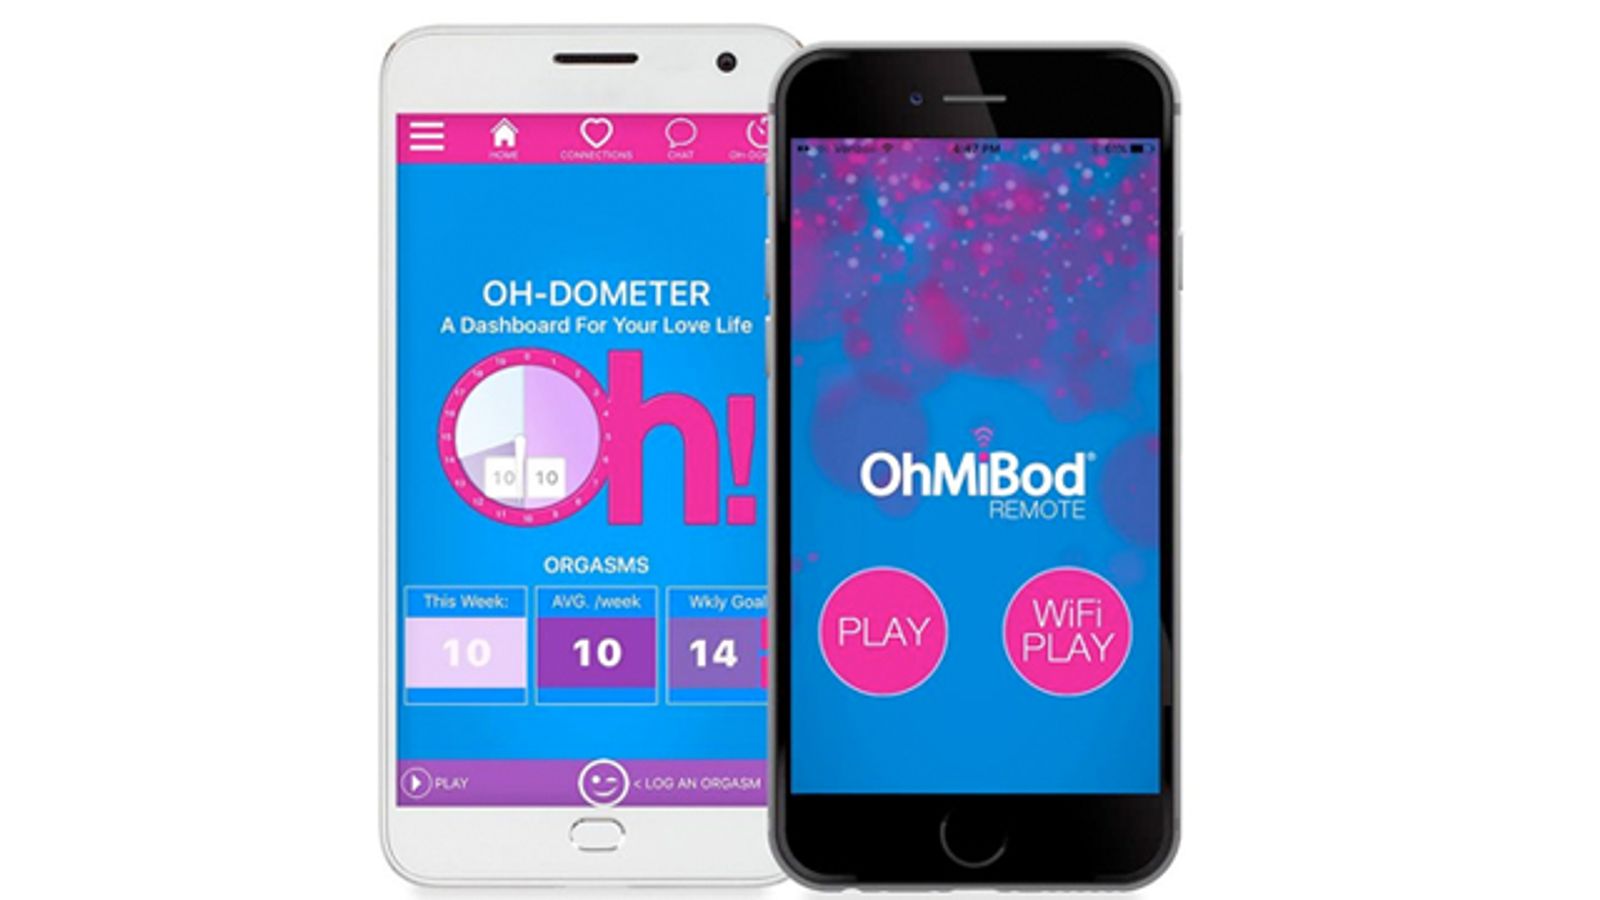 OhMiBod Remote Updated with ‘Oh-Dometer,’ Dashboard For Love Life